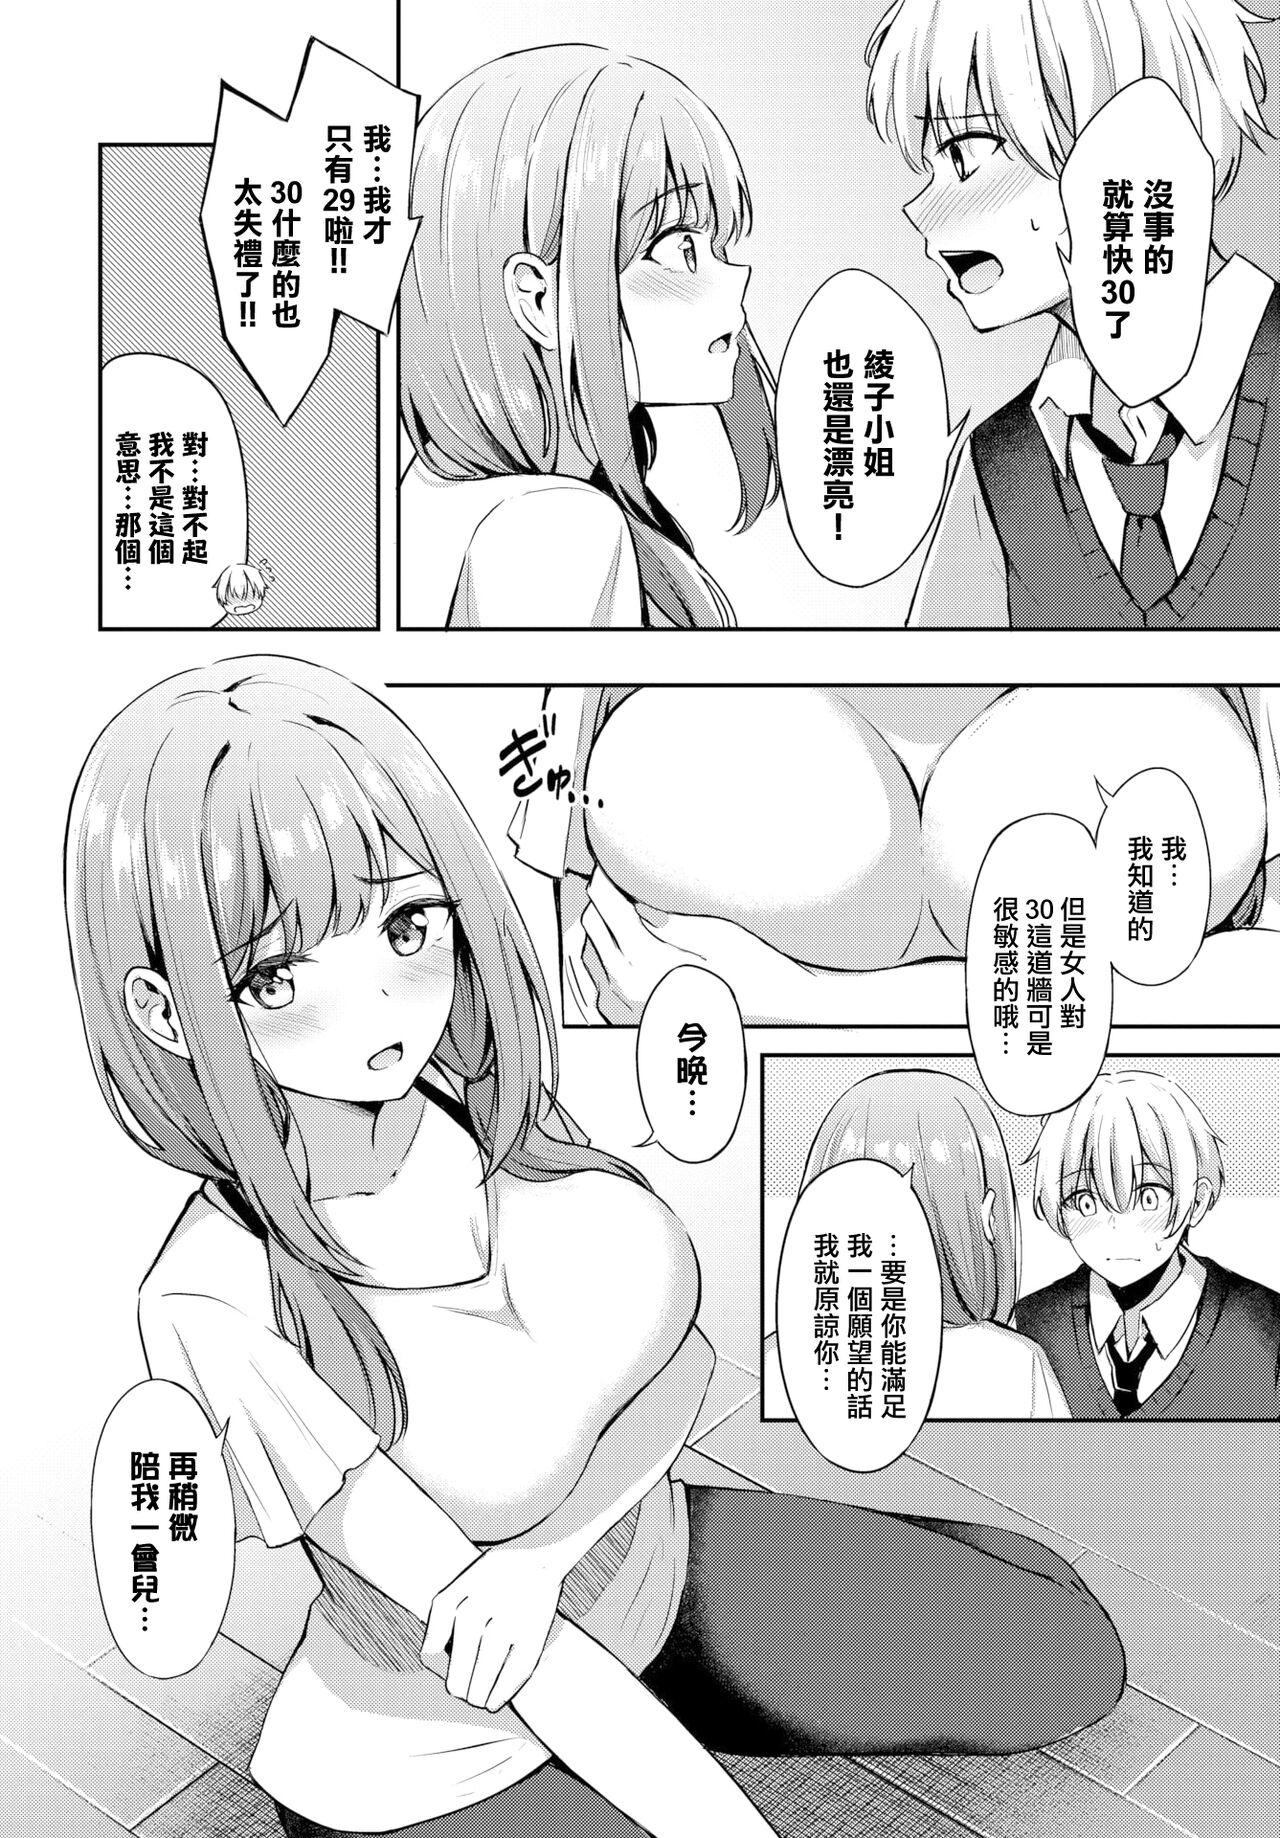 Chat Toshiue no ohimesama♥ Hot Cunt - Page 7